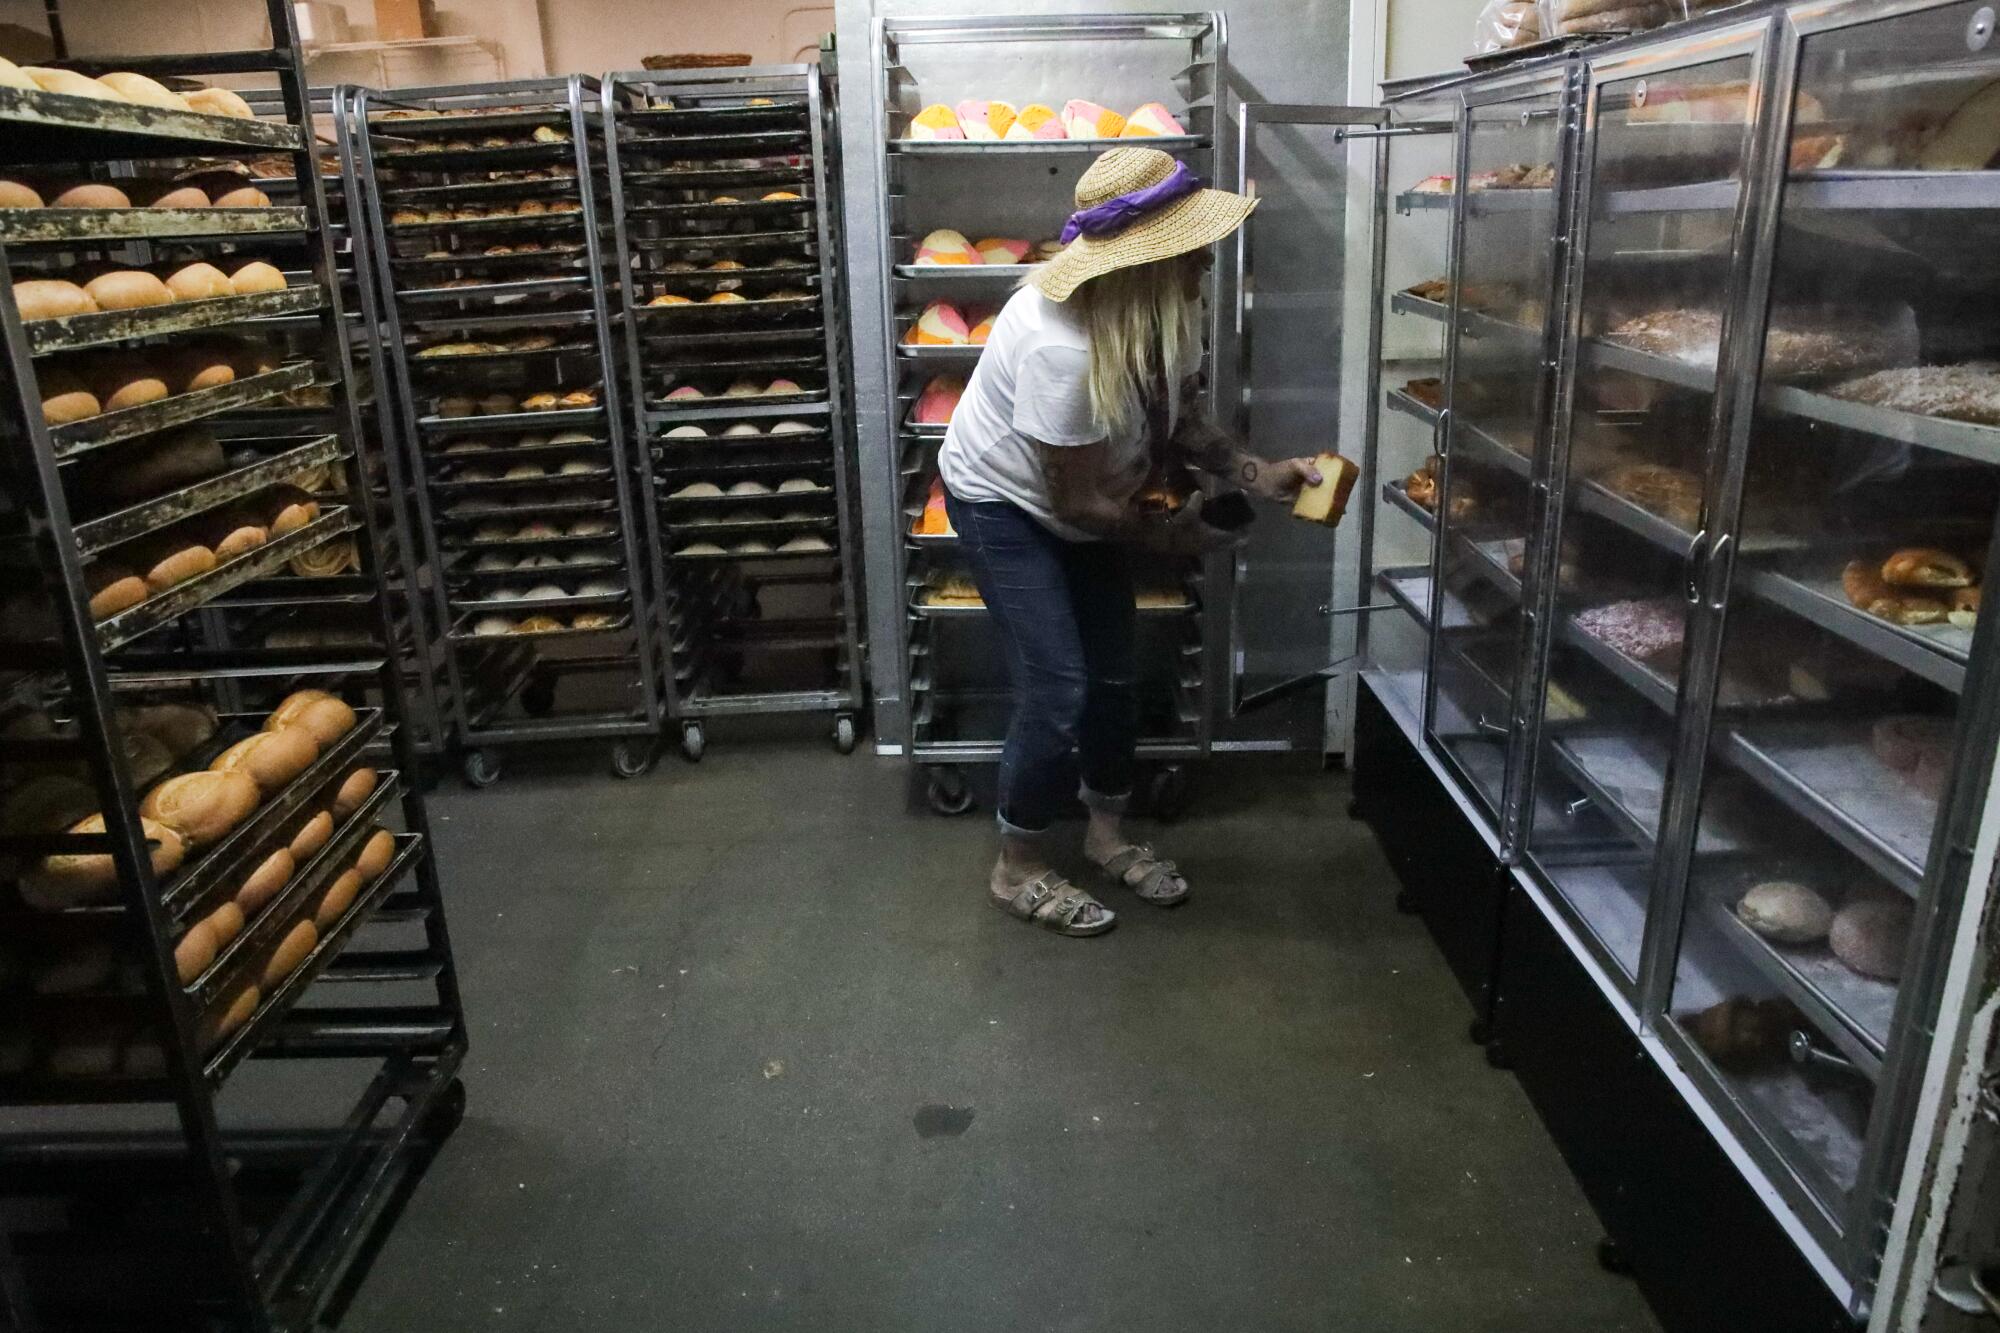 A person stands in a room surrounded by racks of pastry.